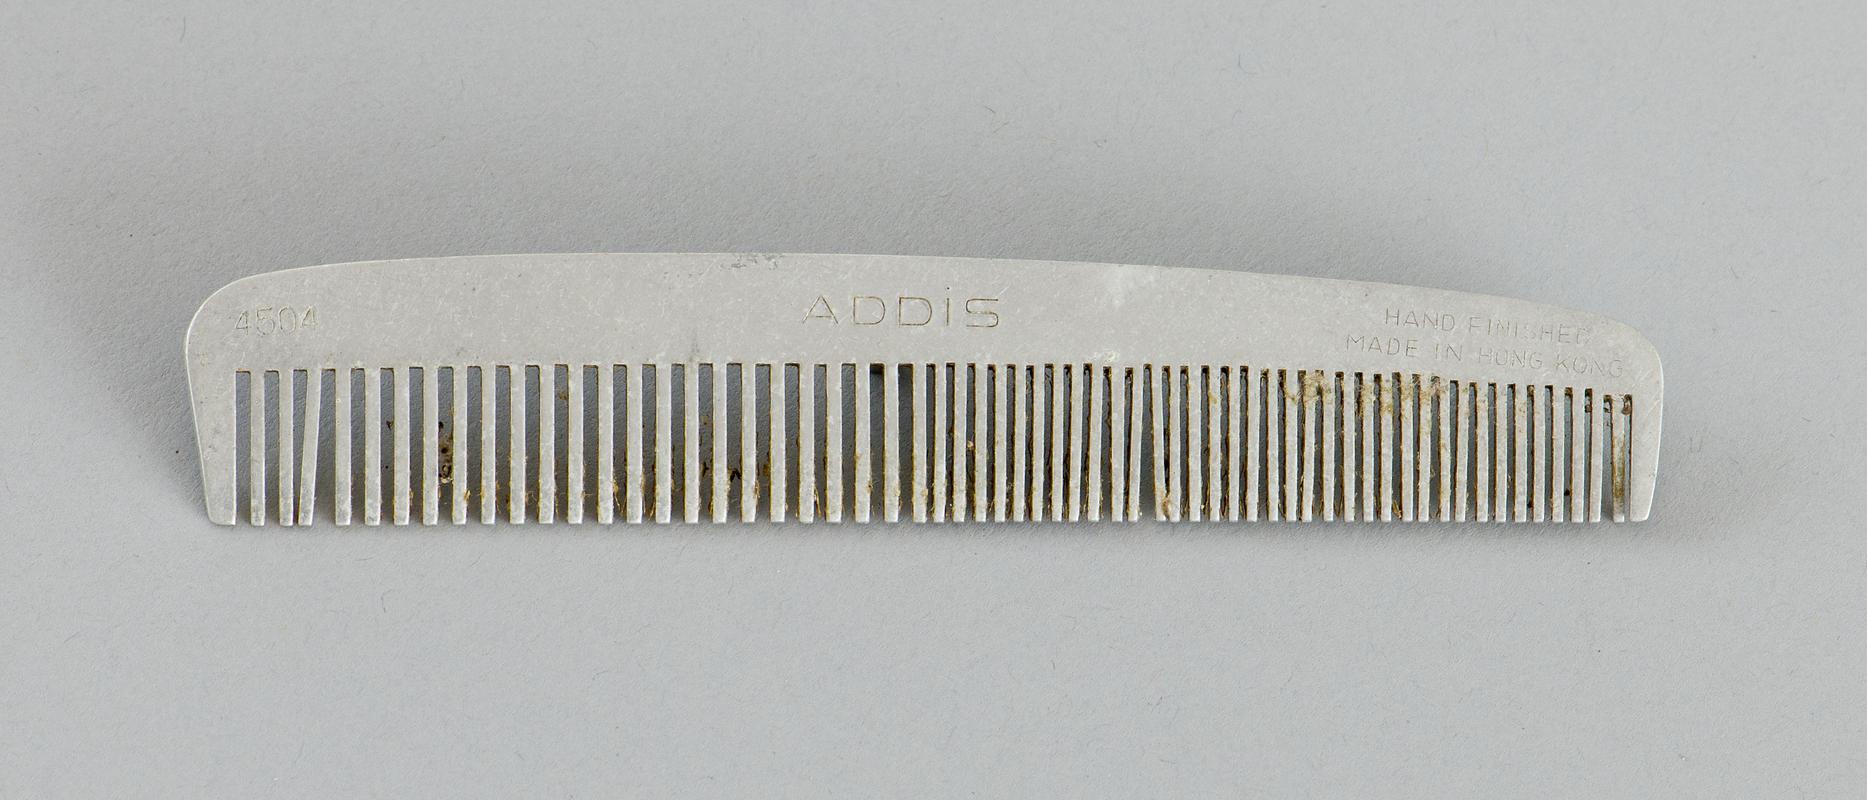 Addis stainless steel comb.